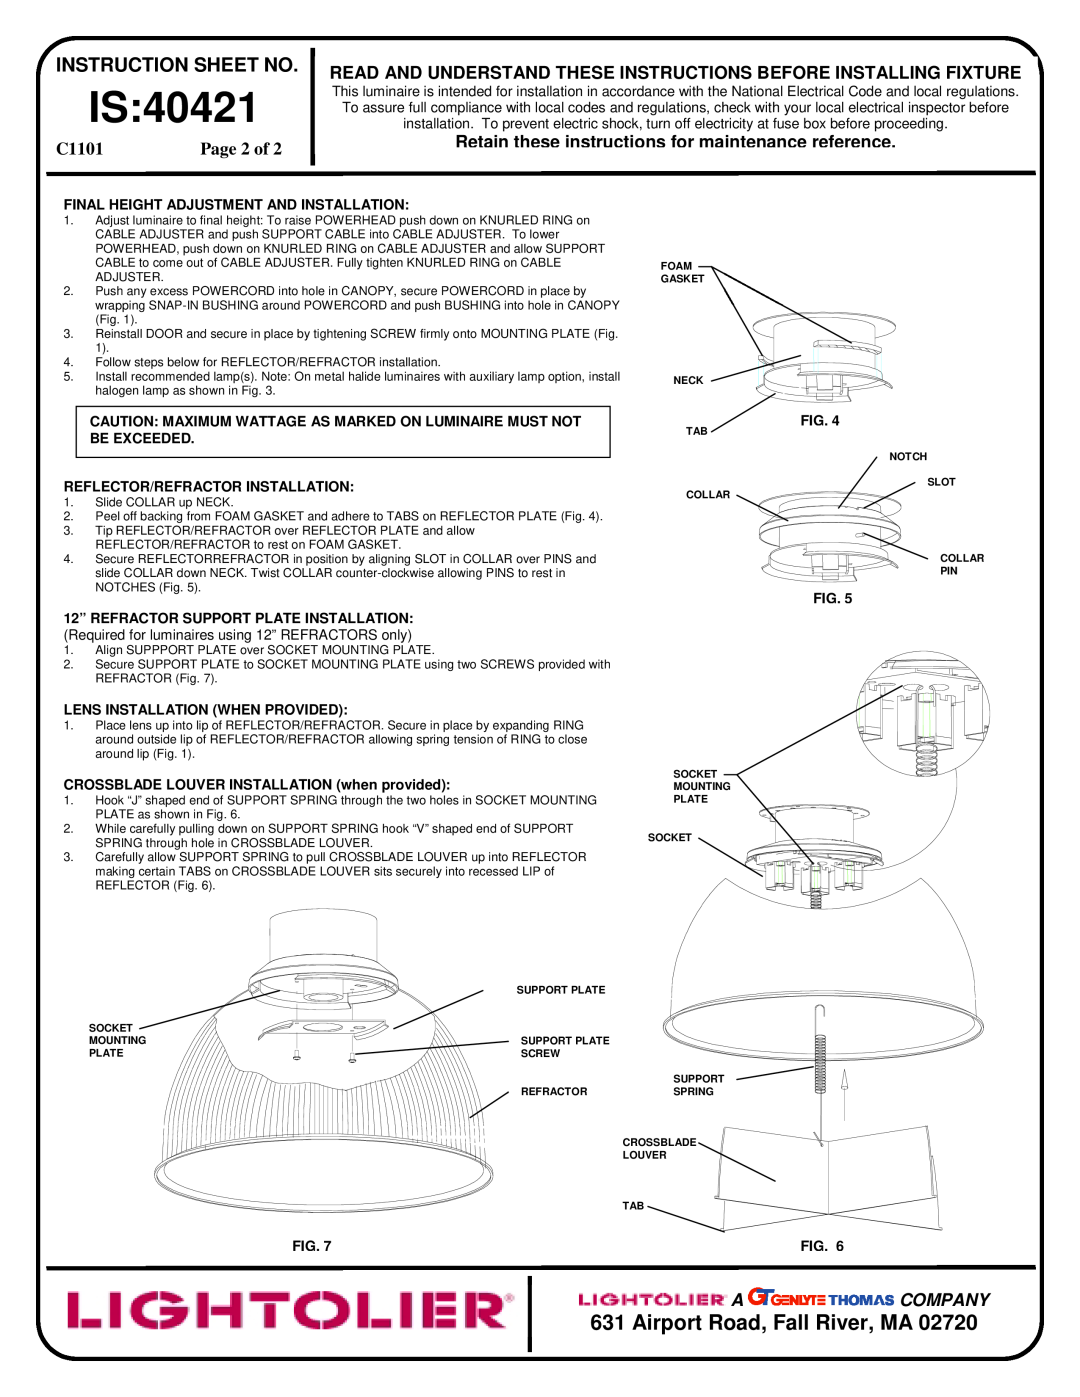 Lightolier IS:40421 instruction sheet Page 2 of, Is, Airport Road, Fall River, MA, Instruction Sheet No, C1101, A Company 